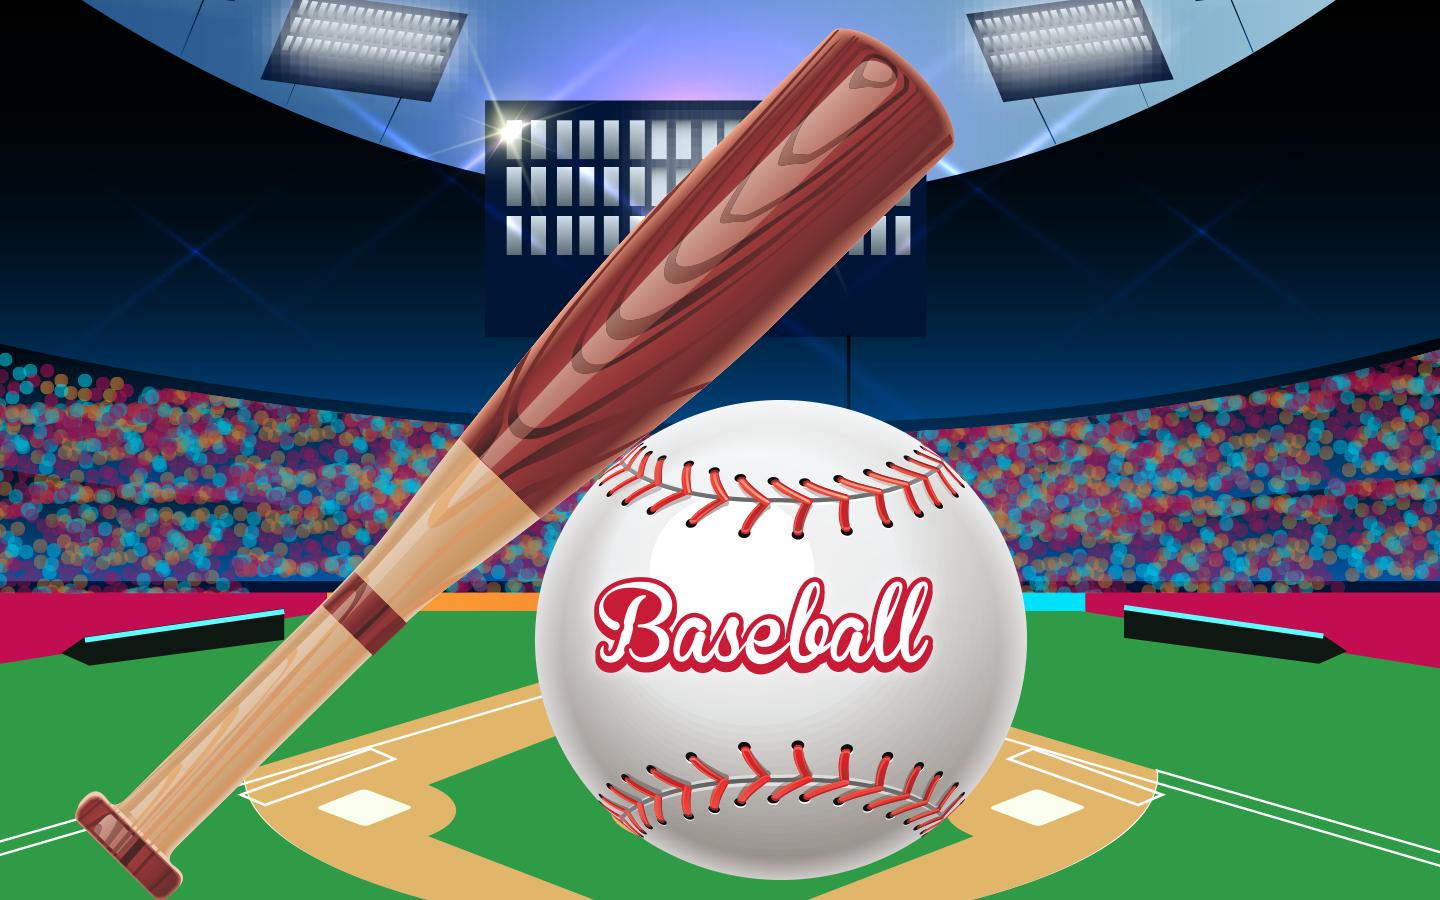 Baseball Game for Android - APK Download